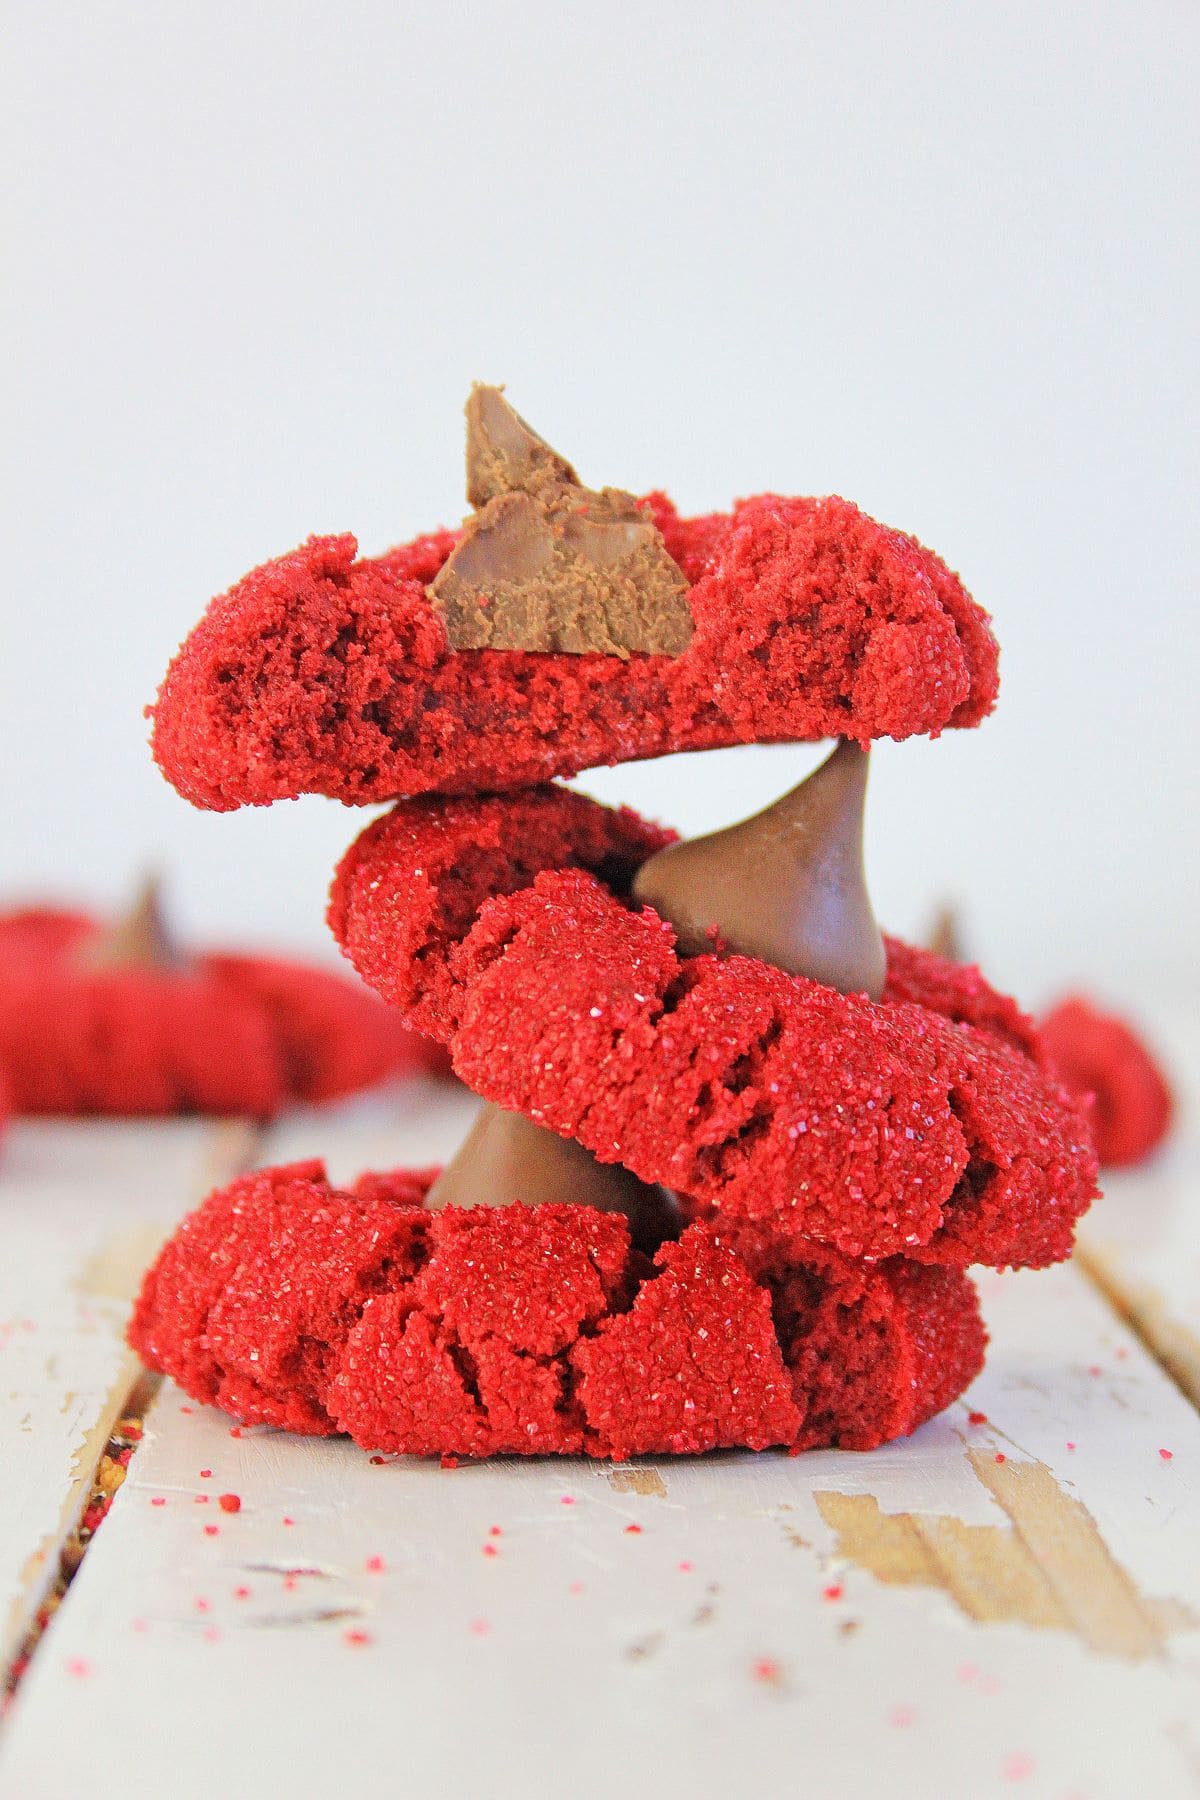 Three red velvet peanut butter blossoms stacked on a wooden countertop.